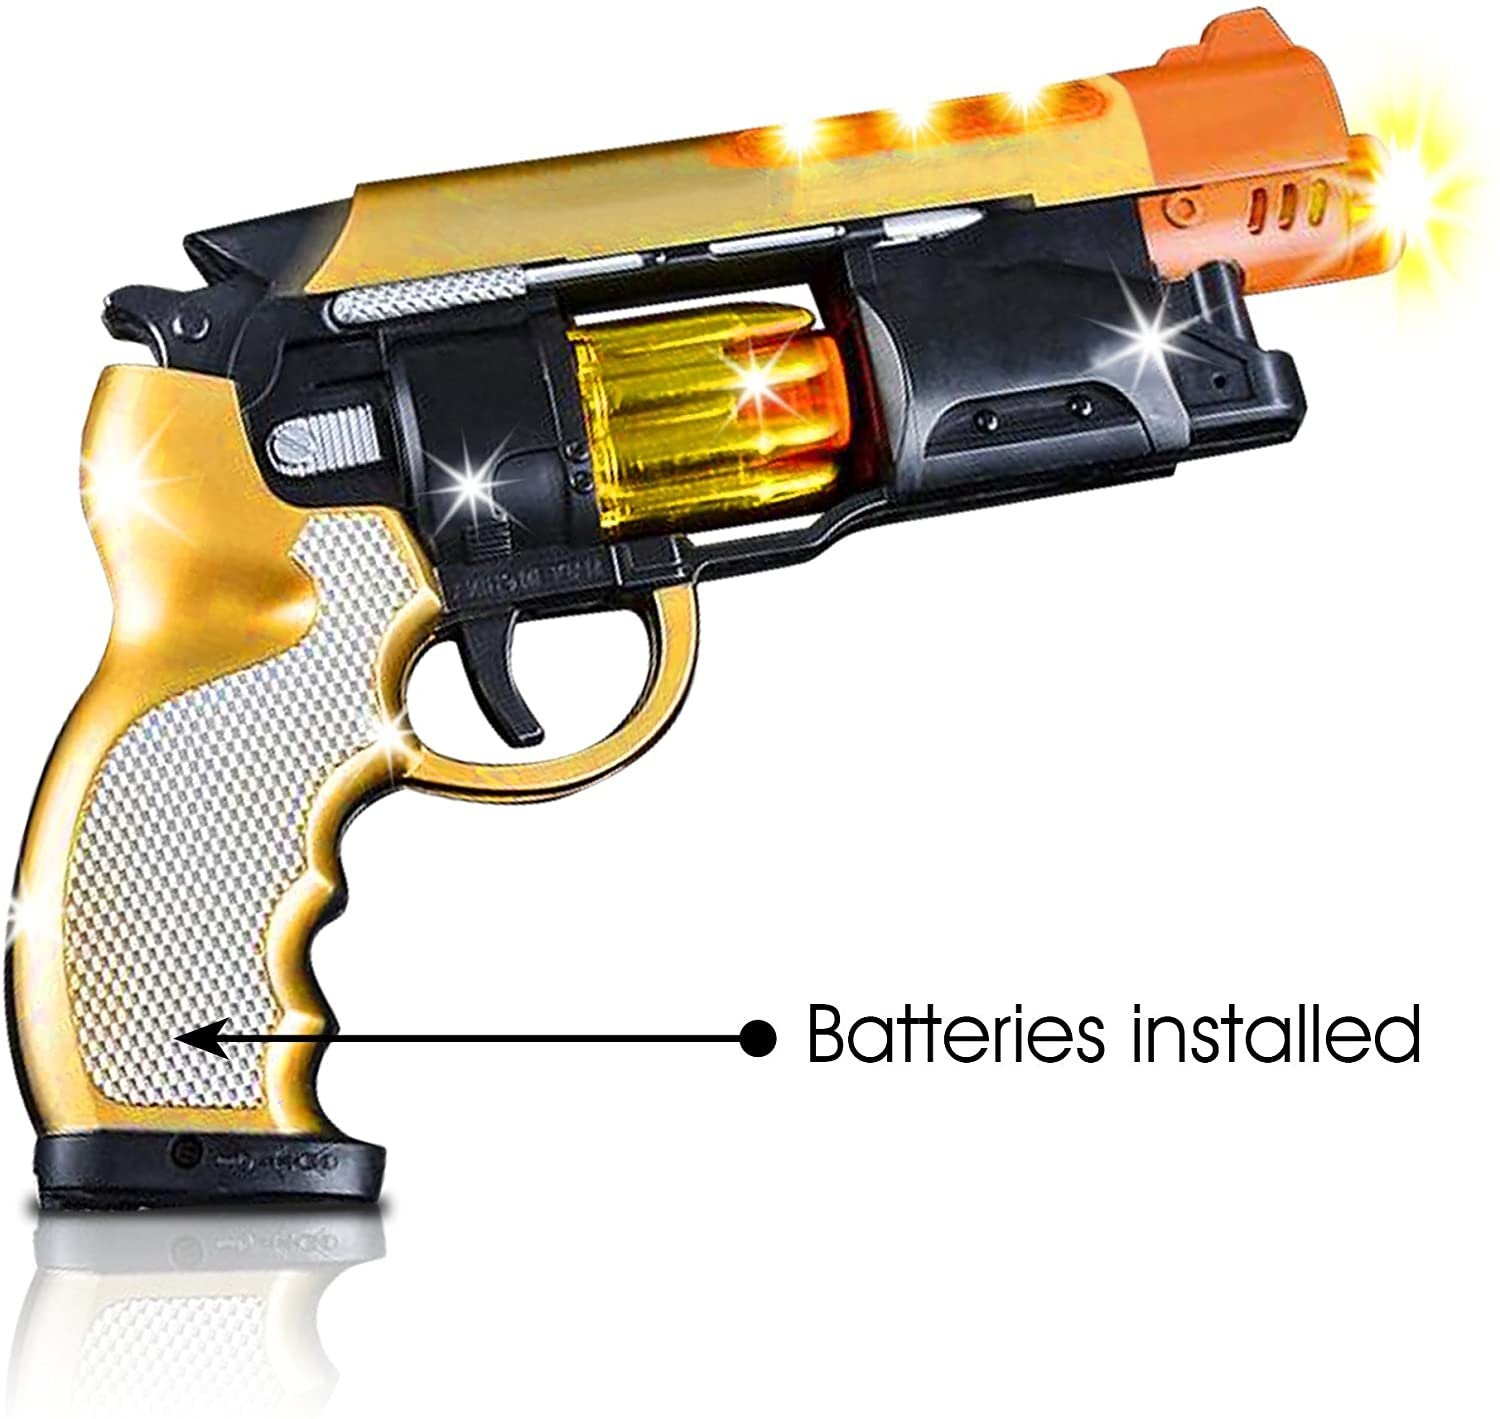 Blade Runner Toy Pistol by Toy Gun for Kids with LED and Sound Effects, Design, Batteries Included, Sturdy Plastic Design, Great Gift Idea for Boys & Girls